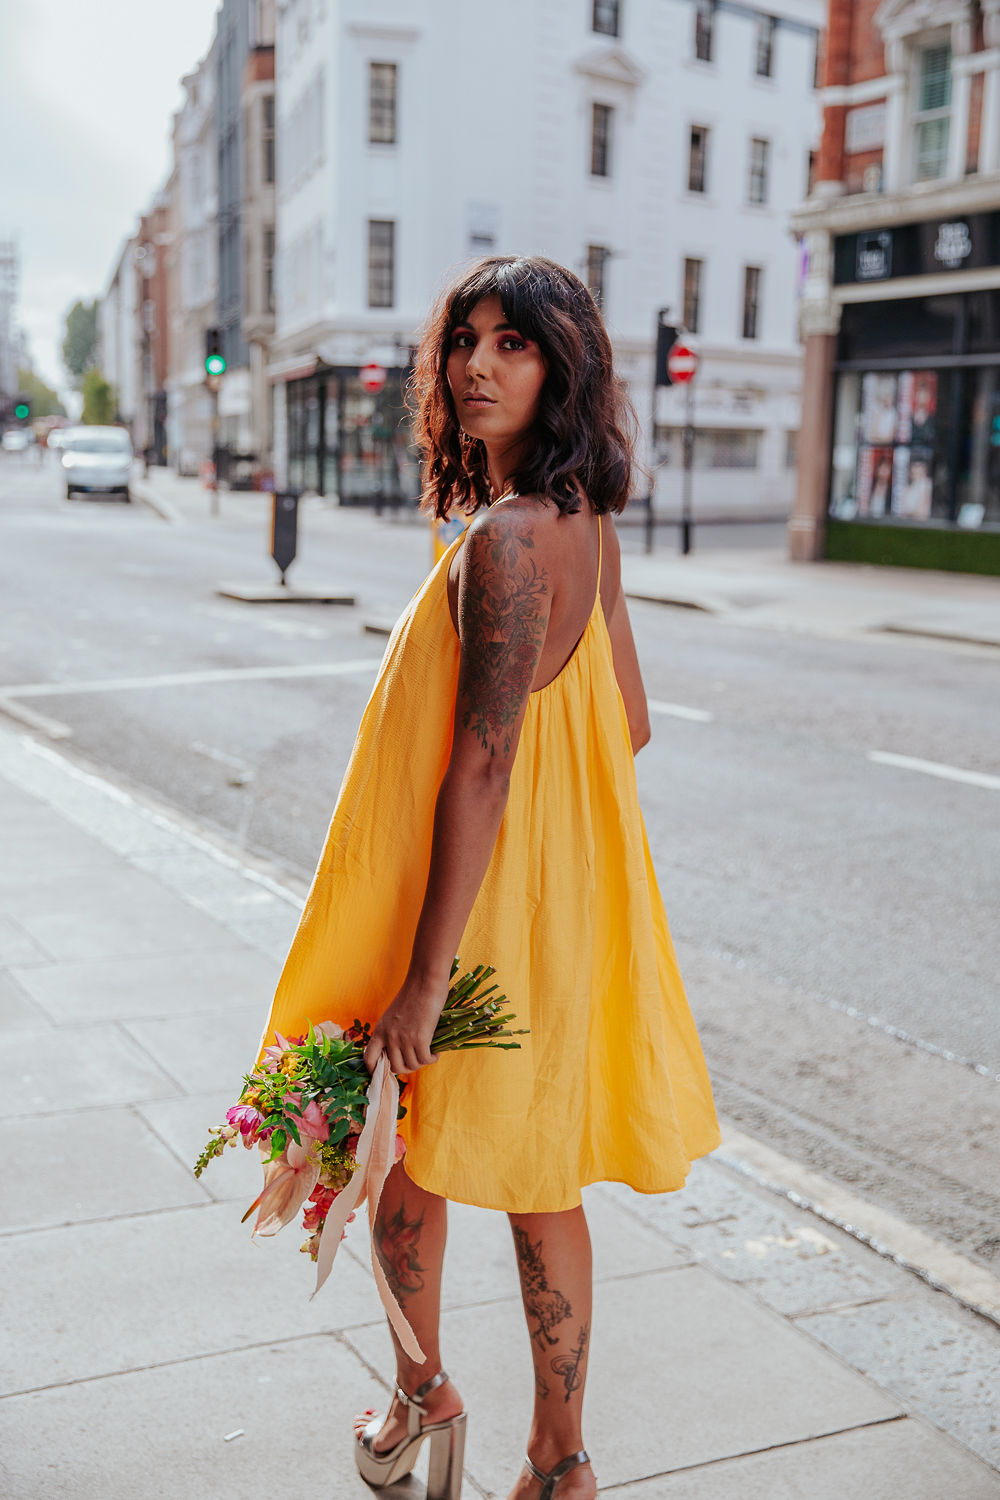 Tropical City Wedding Inspiration At Mortimer House With Short Yellow Wedding Dress